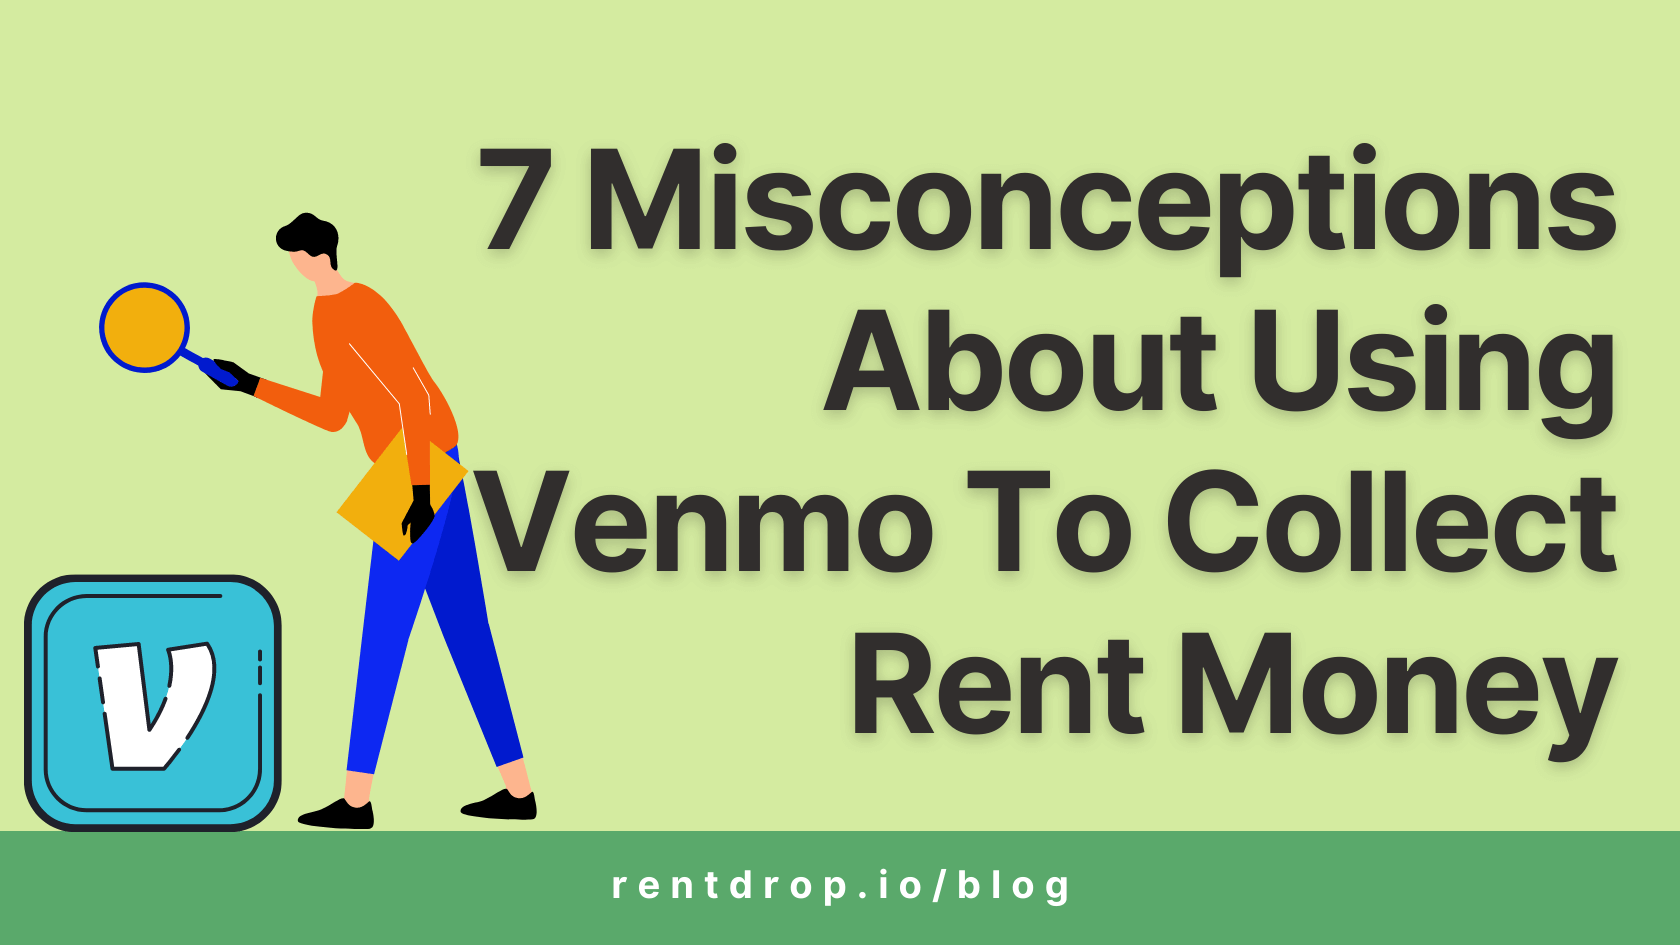 image of 7 Misconceptions About Using Venmo To Collect Rent Money